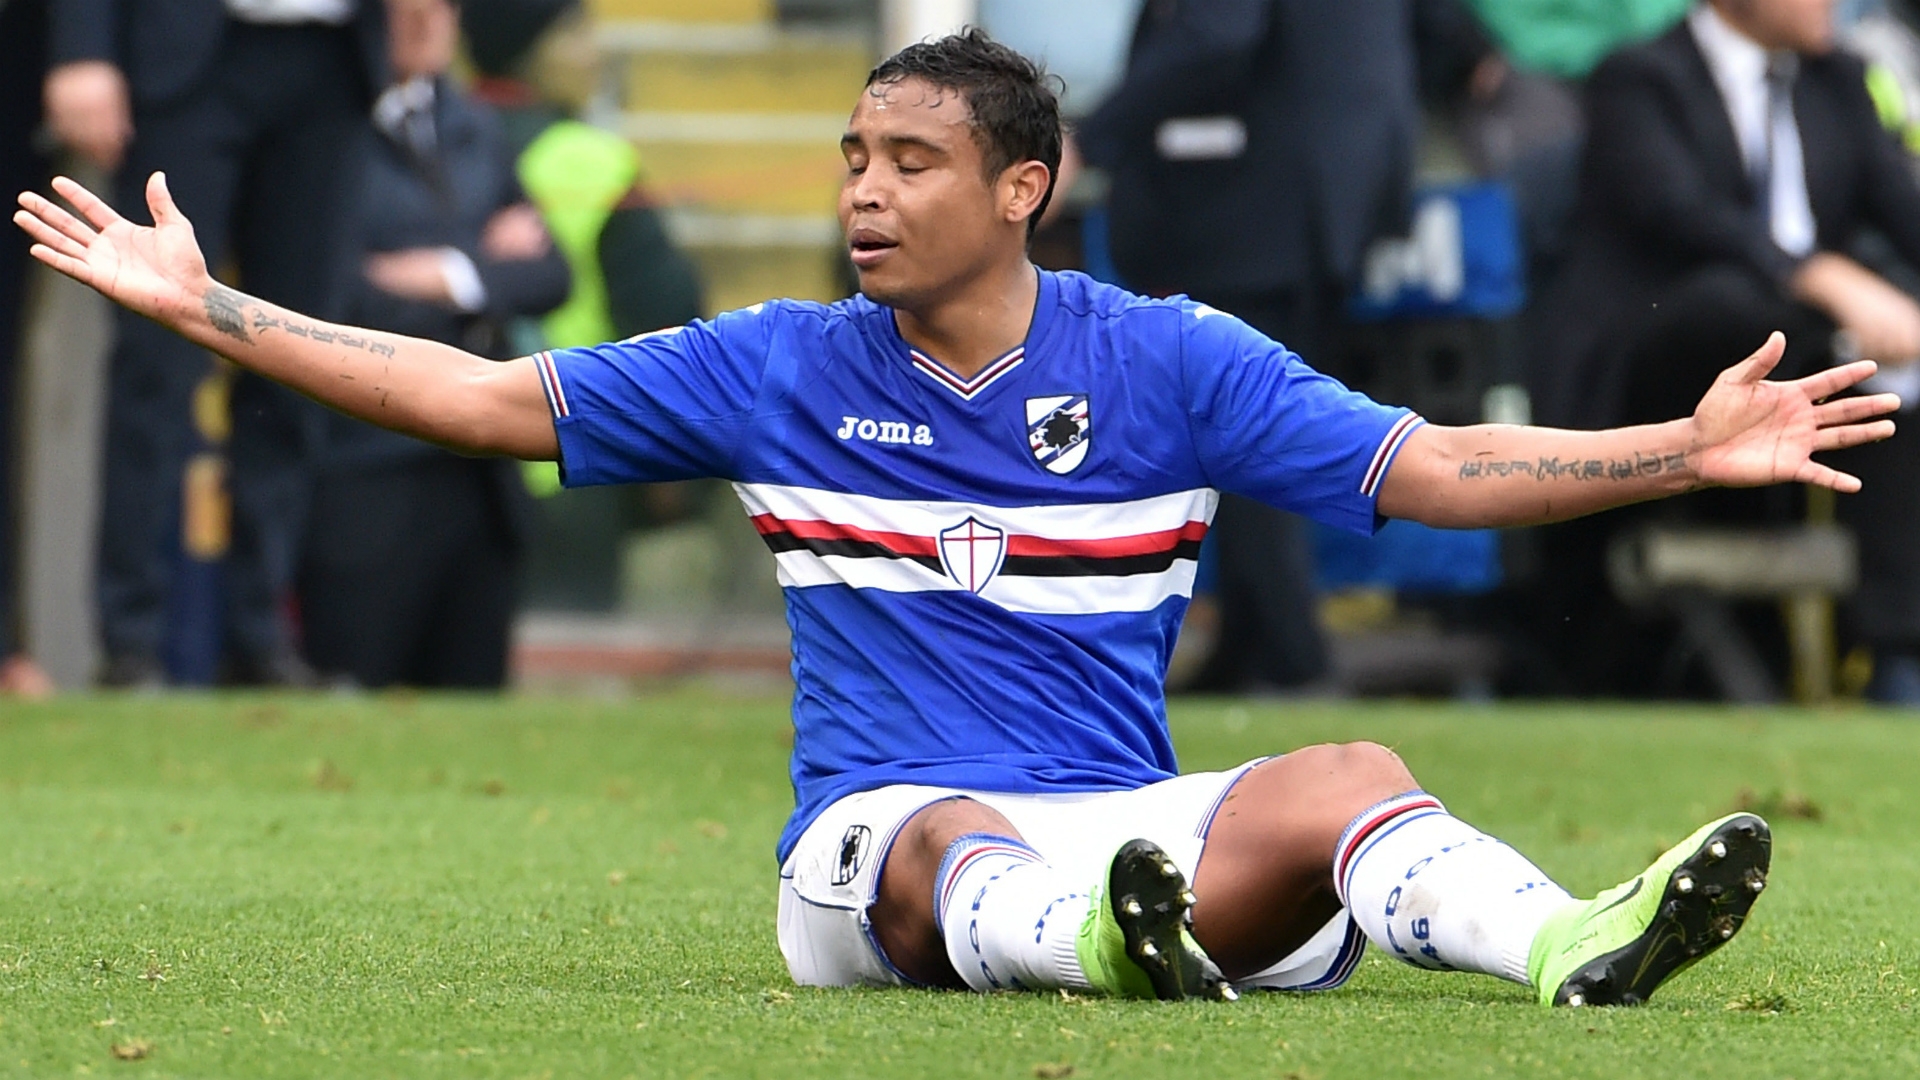 In many ways, Luis Muriel has all the essential qualities of a top striker.